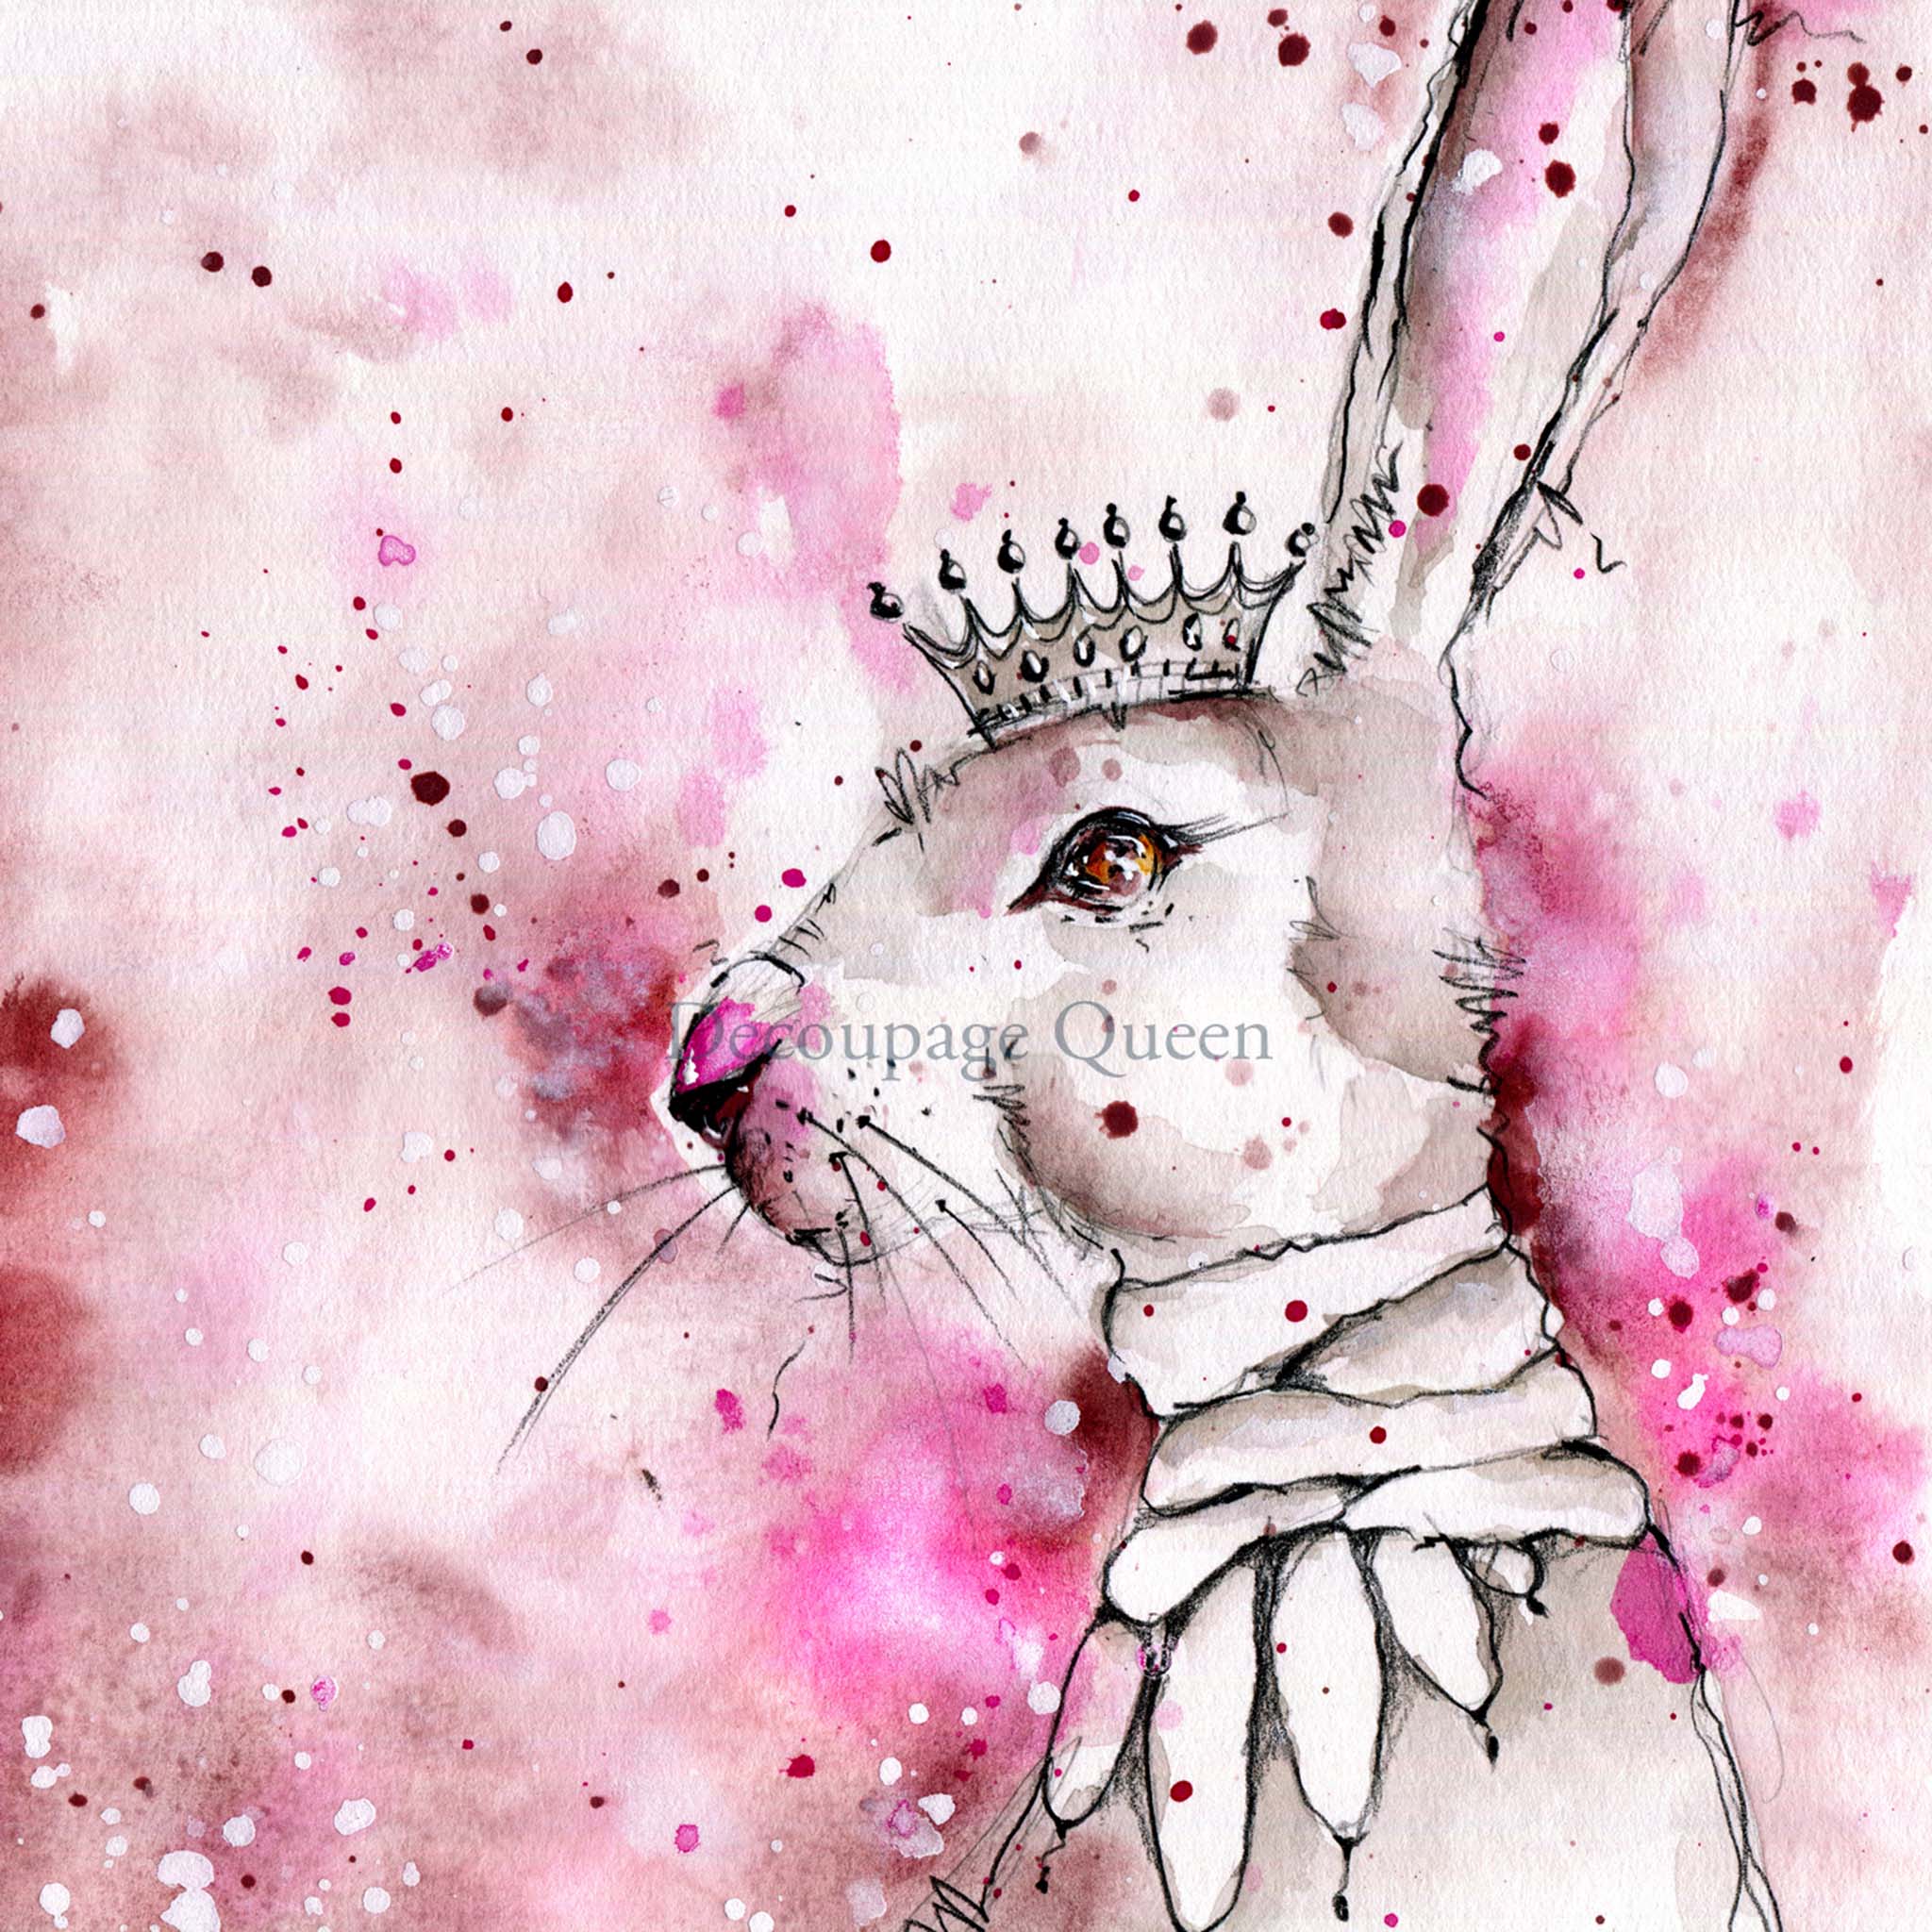 Close-up of an A3 rice paper that features a pink watercolor background and a charming white rabbit wearing a crown and necklace.